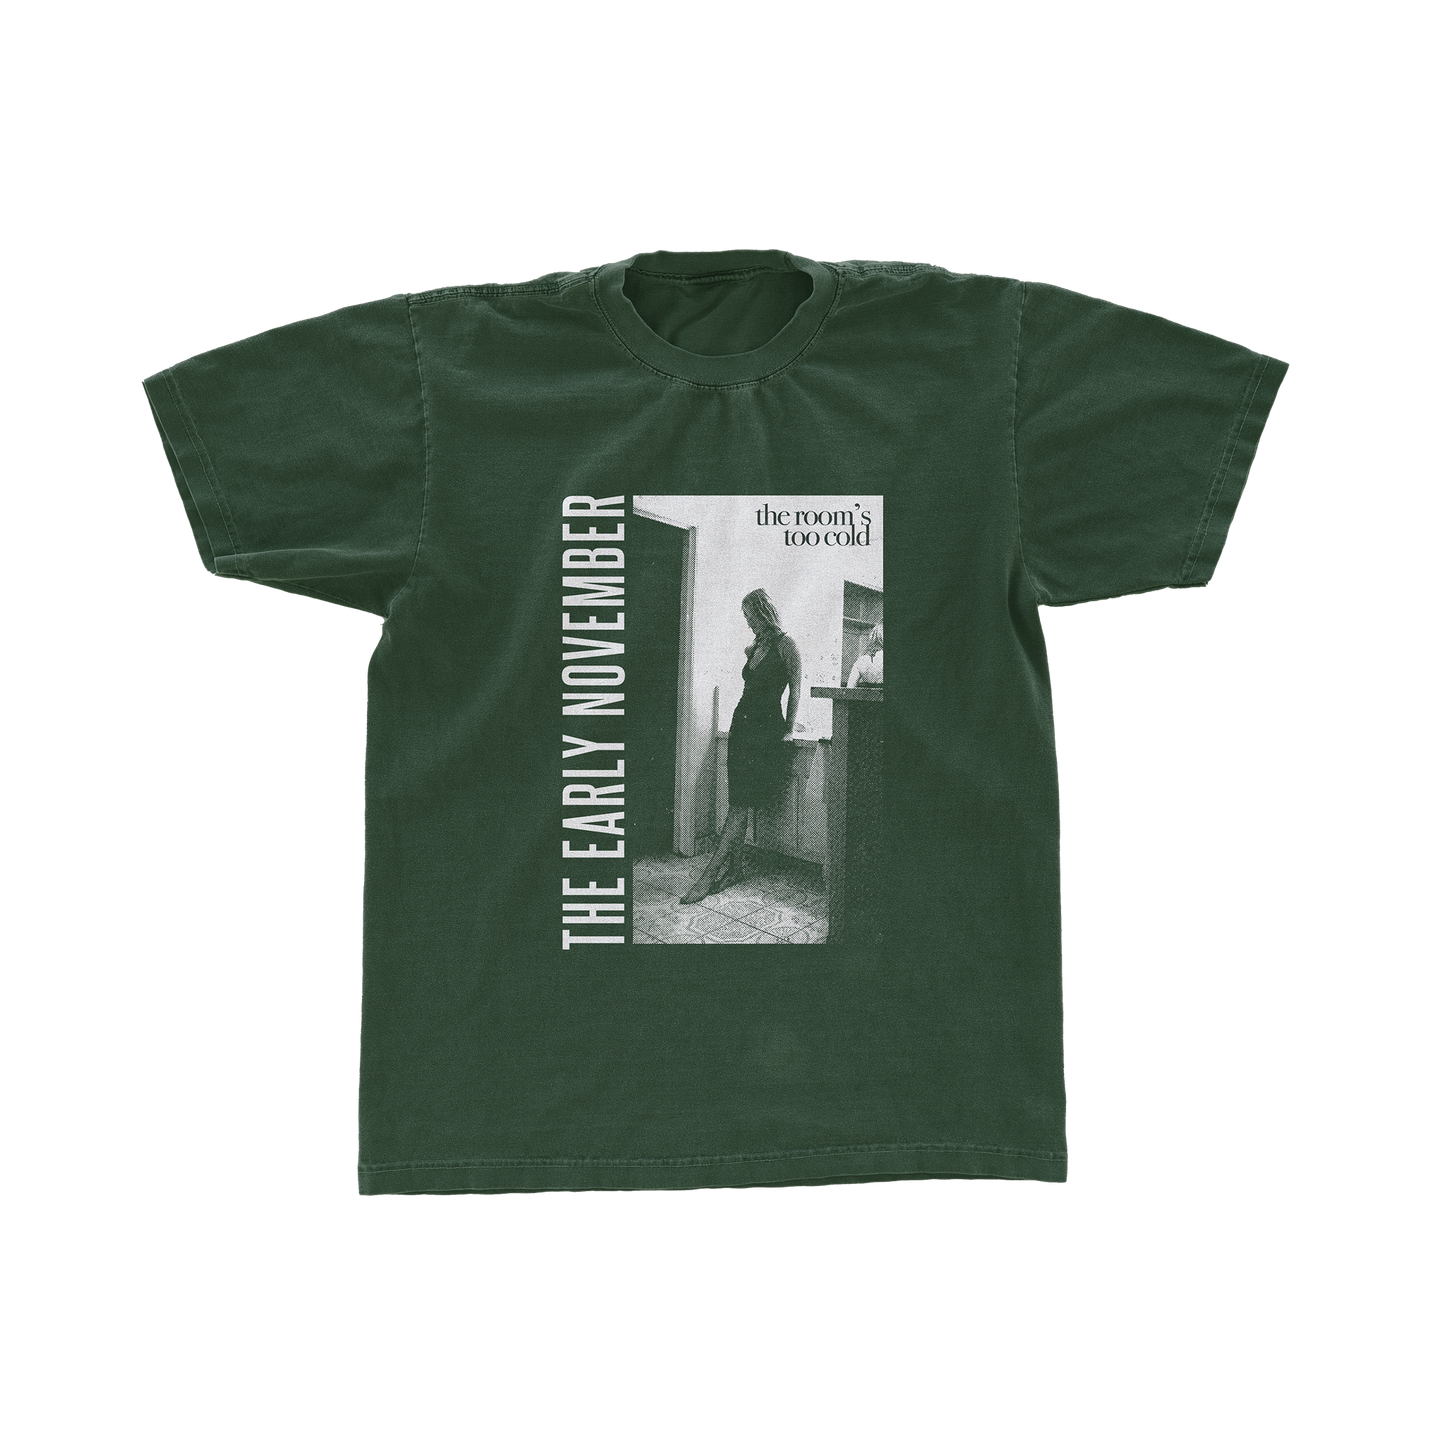 The Early November - "The Room's Too Cold" Short Sleeve Green T-Shirt